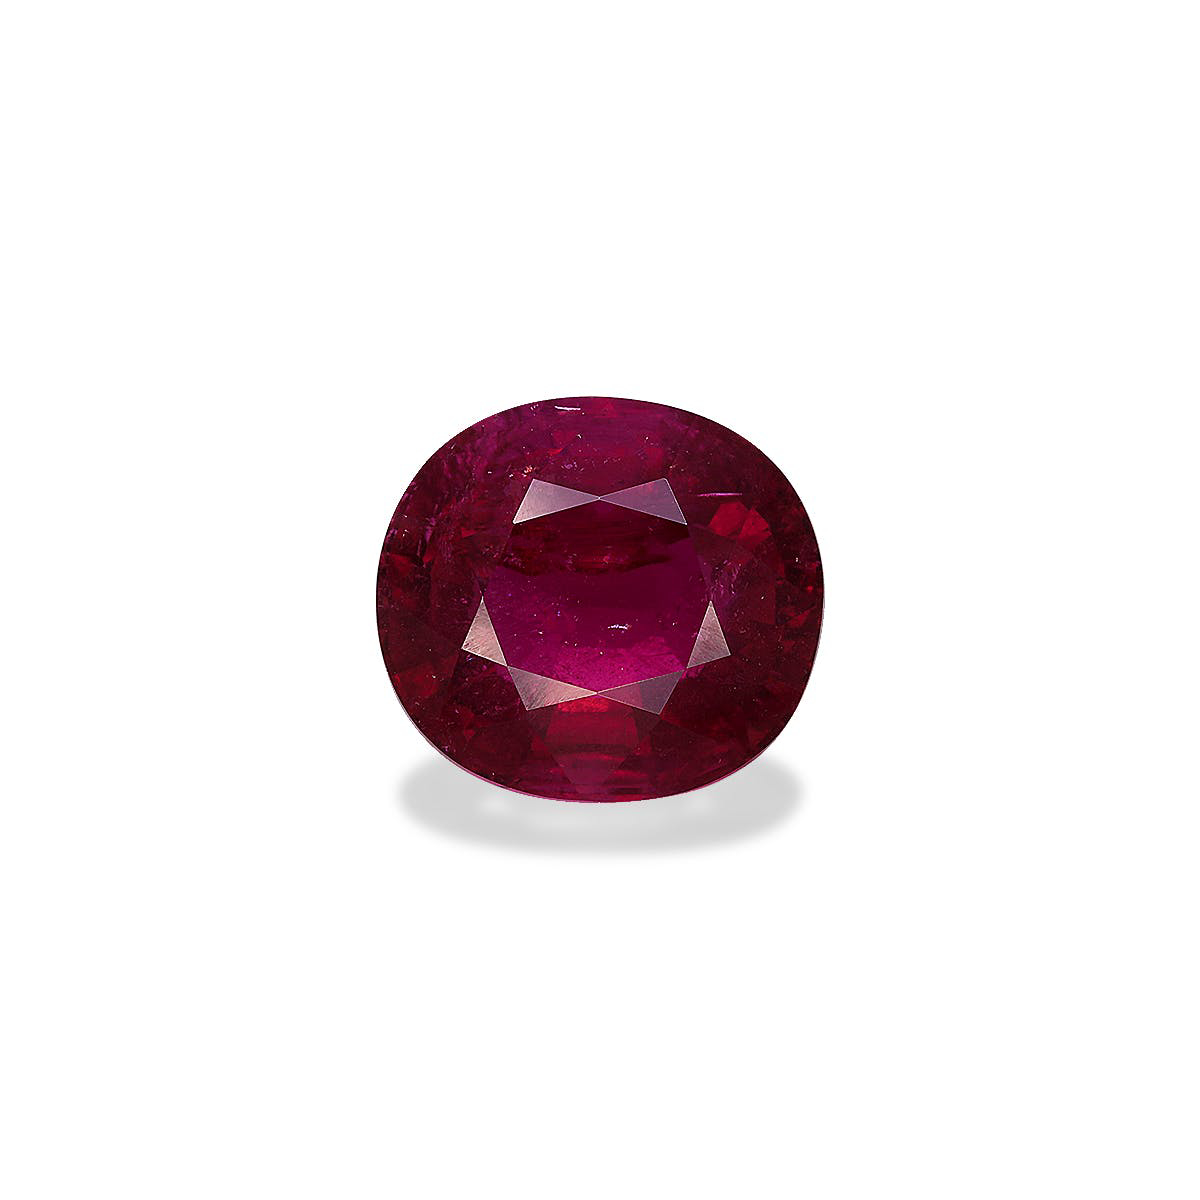 Picture of Red Rubellite Tourmaline 7.54ct (RL0418)